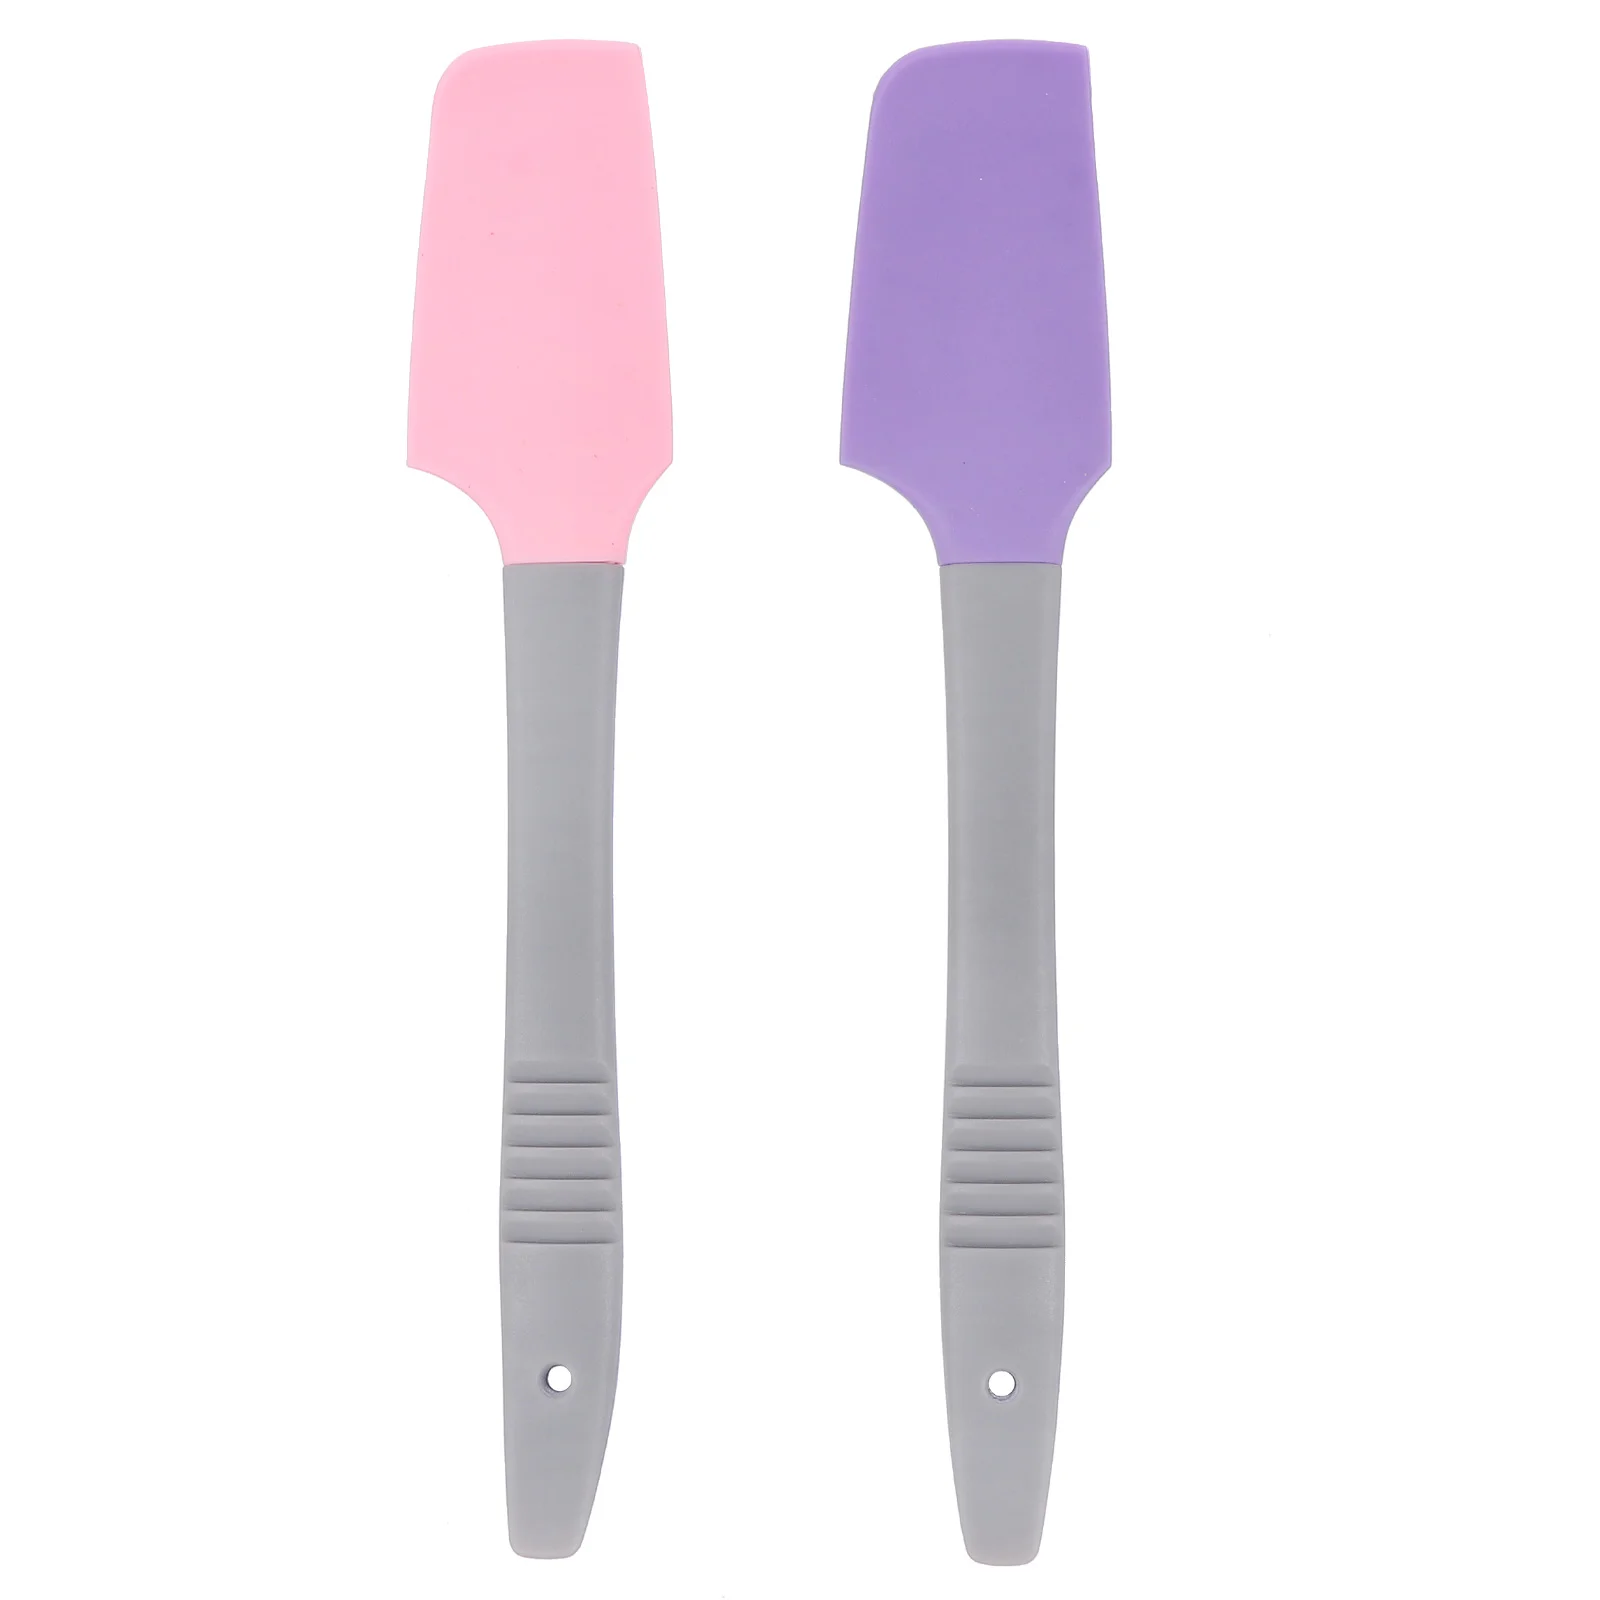 

Wax Sticks Waxing Stick Silicone Applicator Spatulahard Spatulas Hair Popsicle Removal Reusable Makeup Cosmeticlarge Scraper